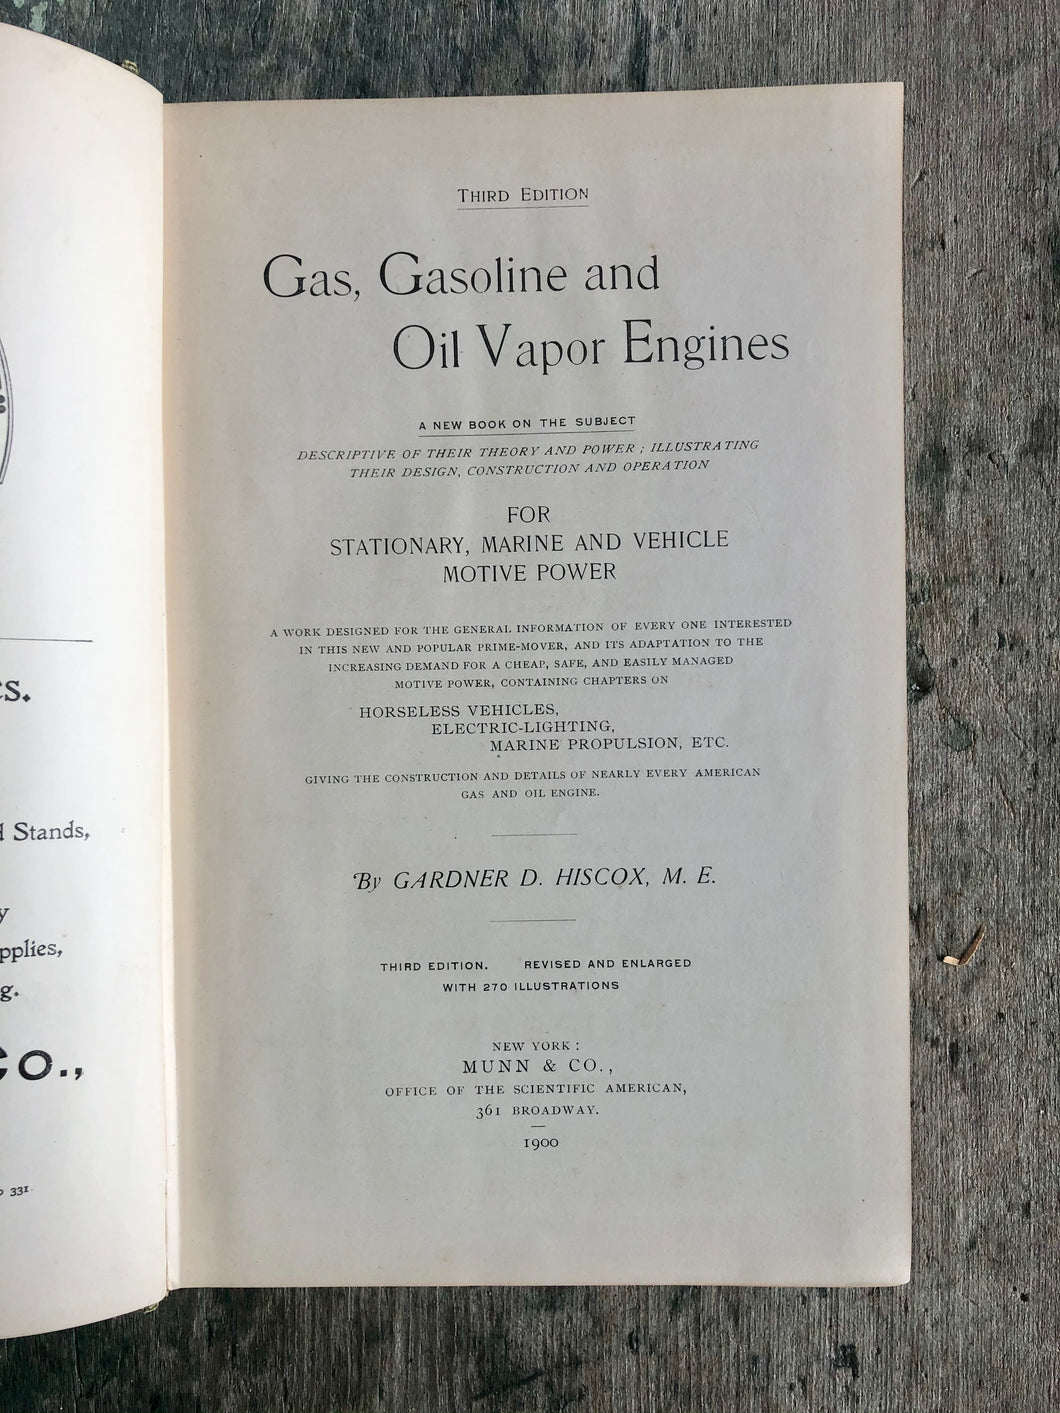 “Gas, Gasoline, and Oil Engines” by Gardner D. Hiscox